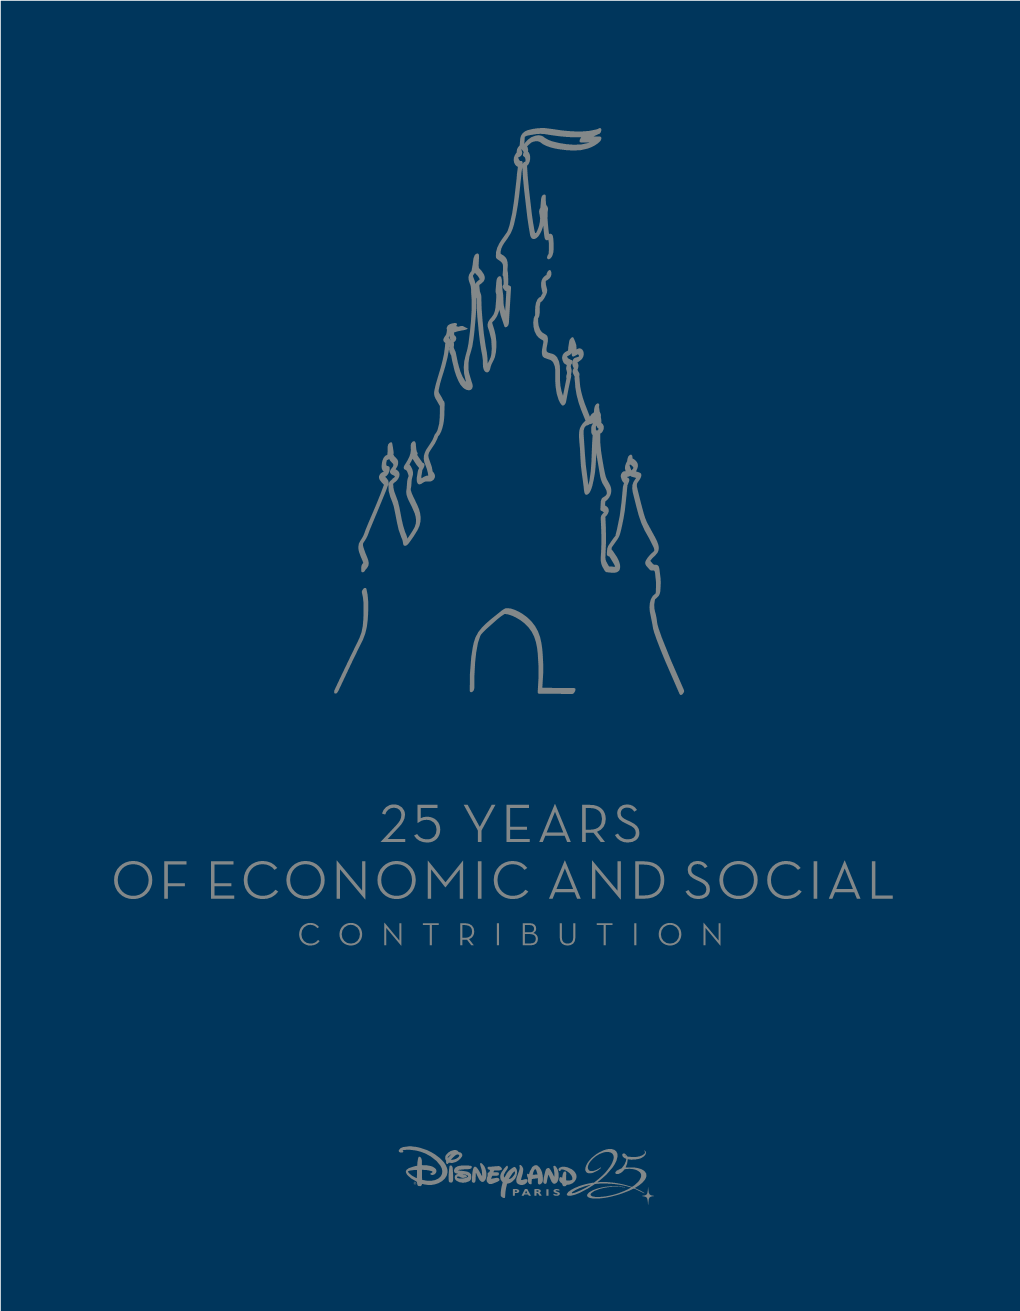 25 Years of Economic and Social Contribution